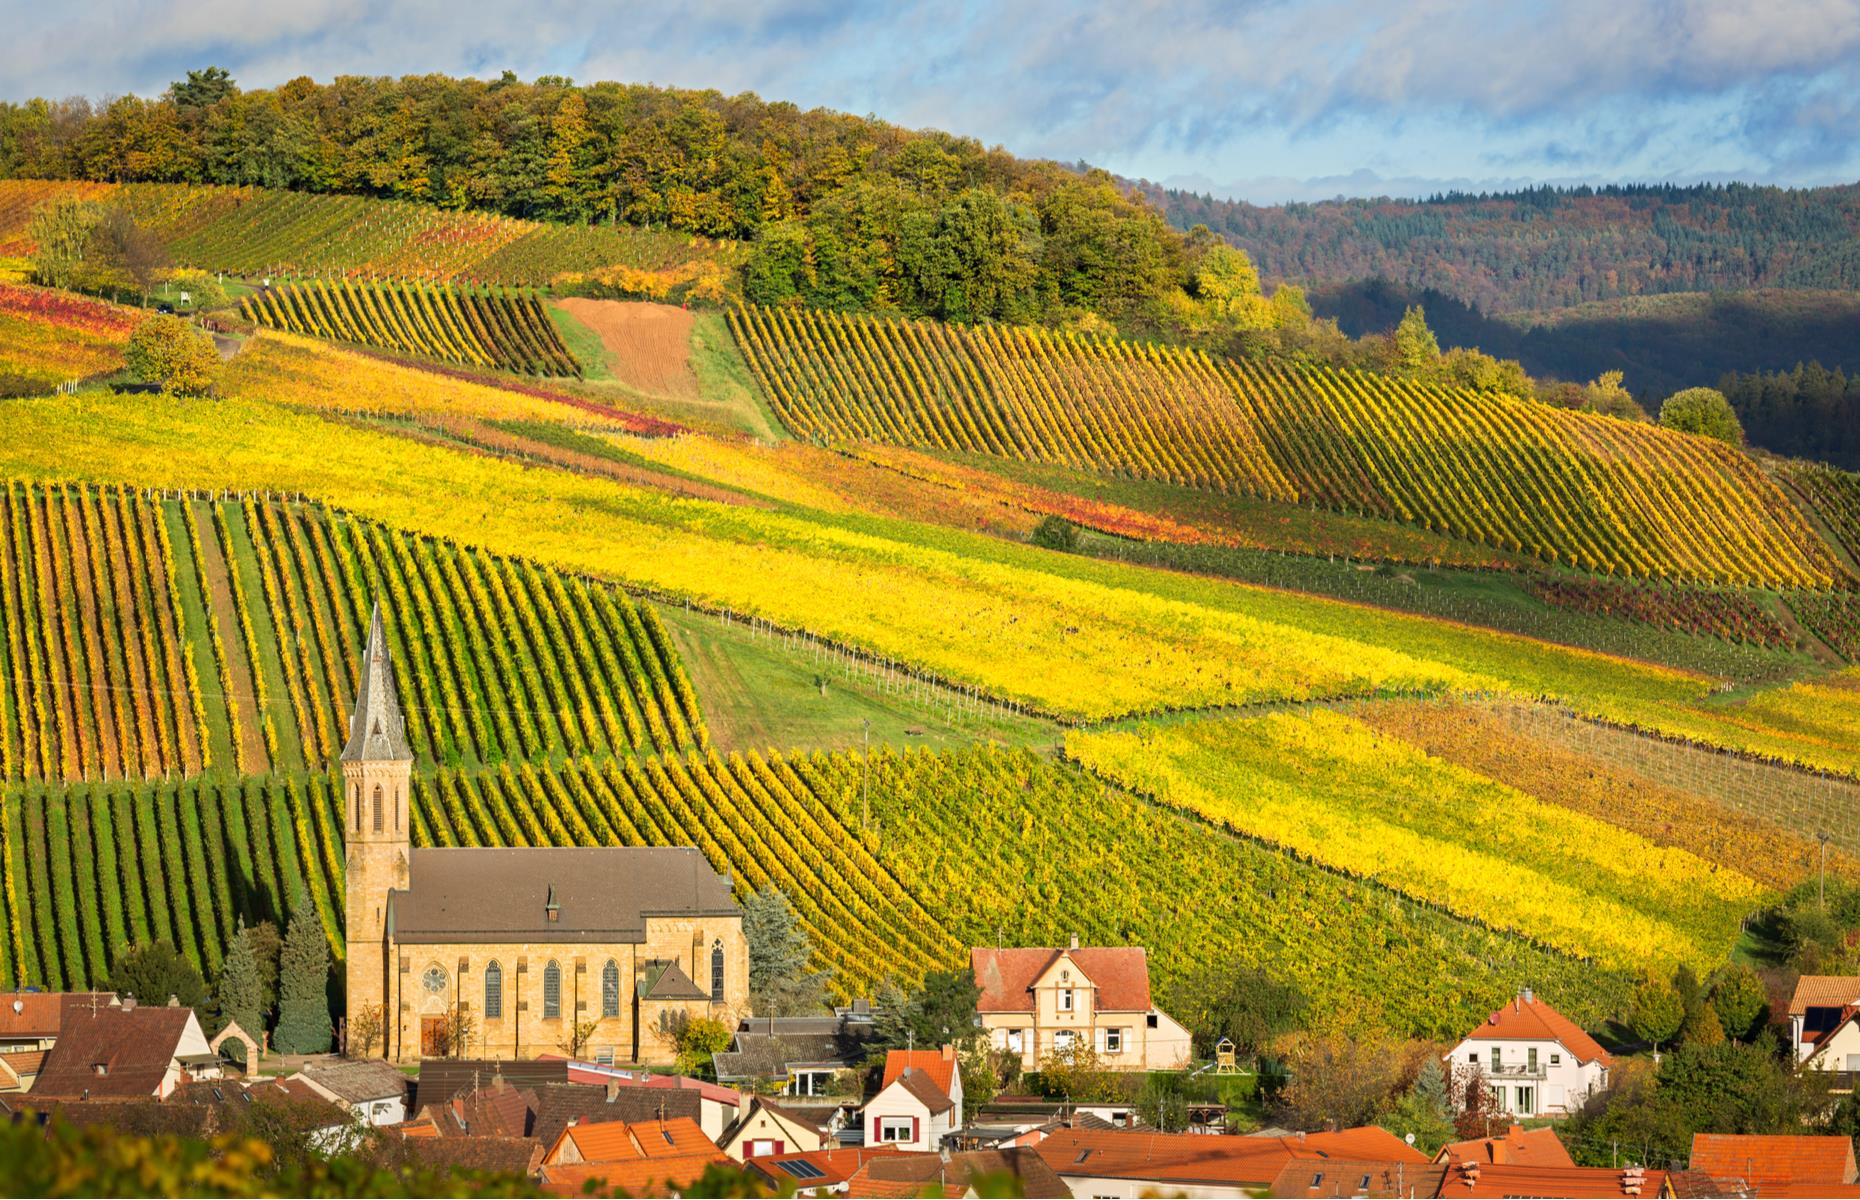 <p>Incorporating the country’s oldest scenic drive, the <a href="https://www.german-wineroute.com/">German Wine Route</a> which was designated in 1935, these 115 miles (185km) or so are best taken slowly, especially for those who plan to taste some of the renowned Riesling wines along the way. From Frankfurt, the road dips south to Bockenheim, the route’s official starting point, and plunges right into the heart of the Palatinate or Pfalz wine region (pictured).</p>